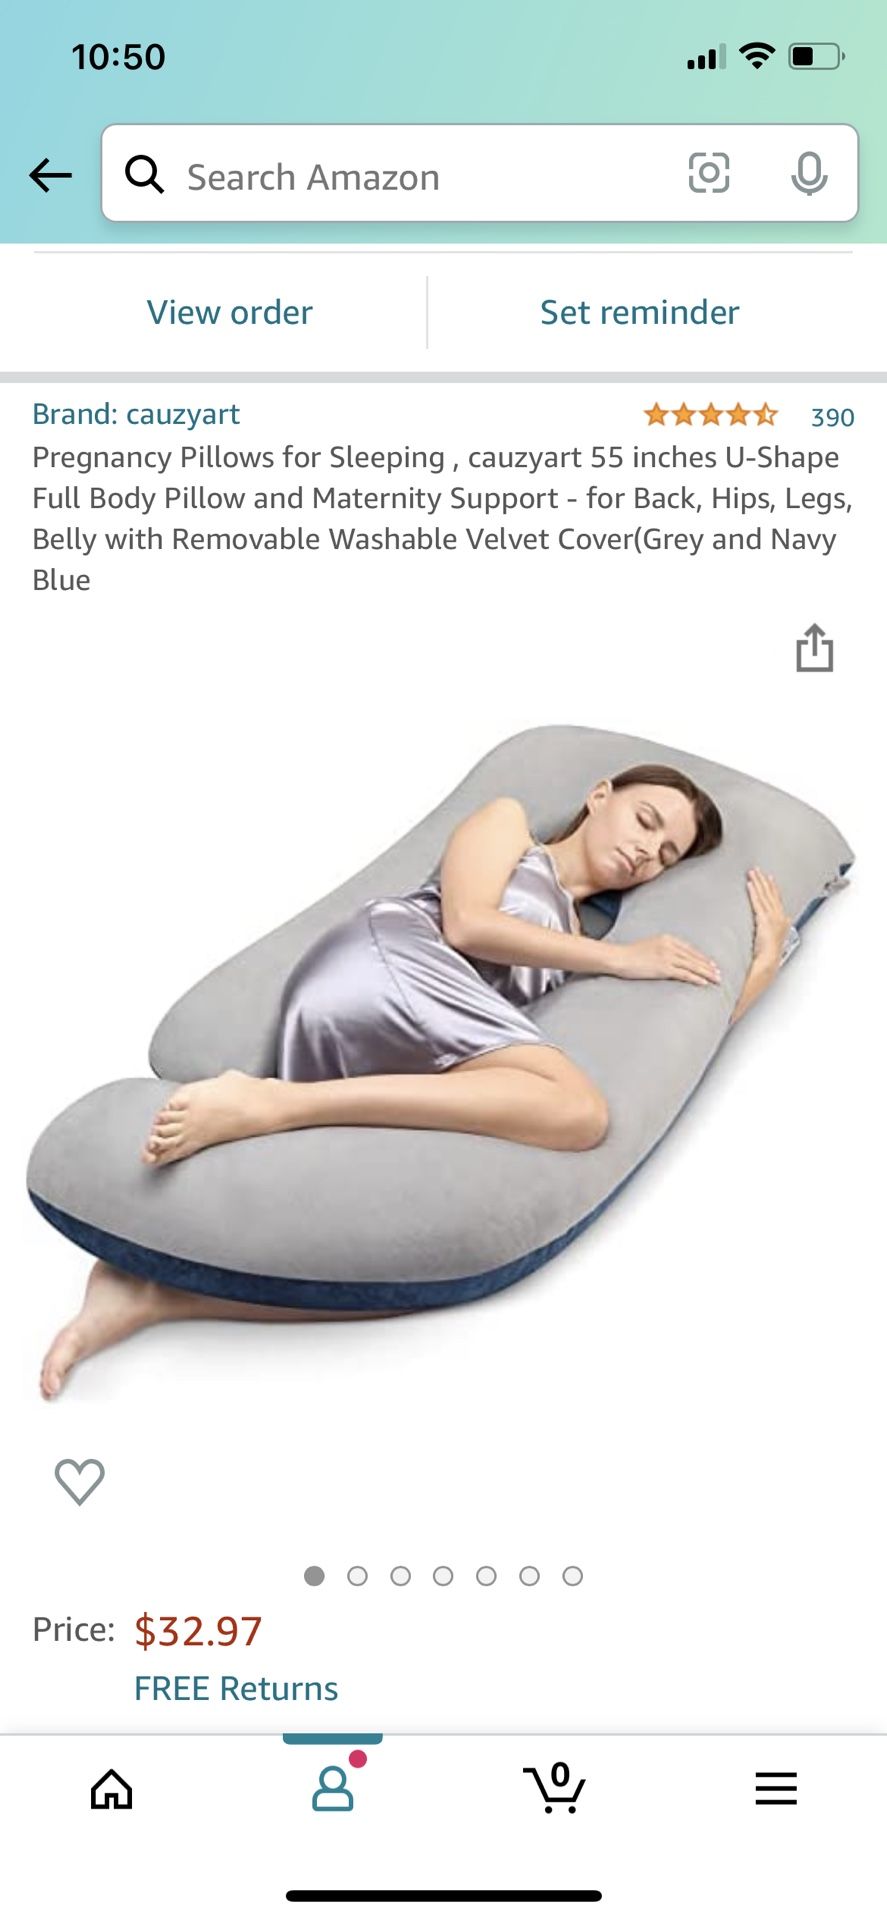 Pregnancy Pillows for Sleeping , cauzyart 55 inches U-Shape Full Body Pillow and Maternity Support - for Back, Hips, Legs, Belly with Removable Washab